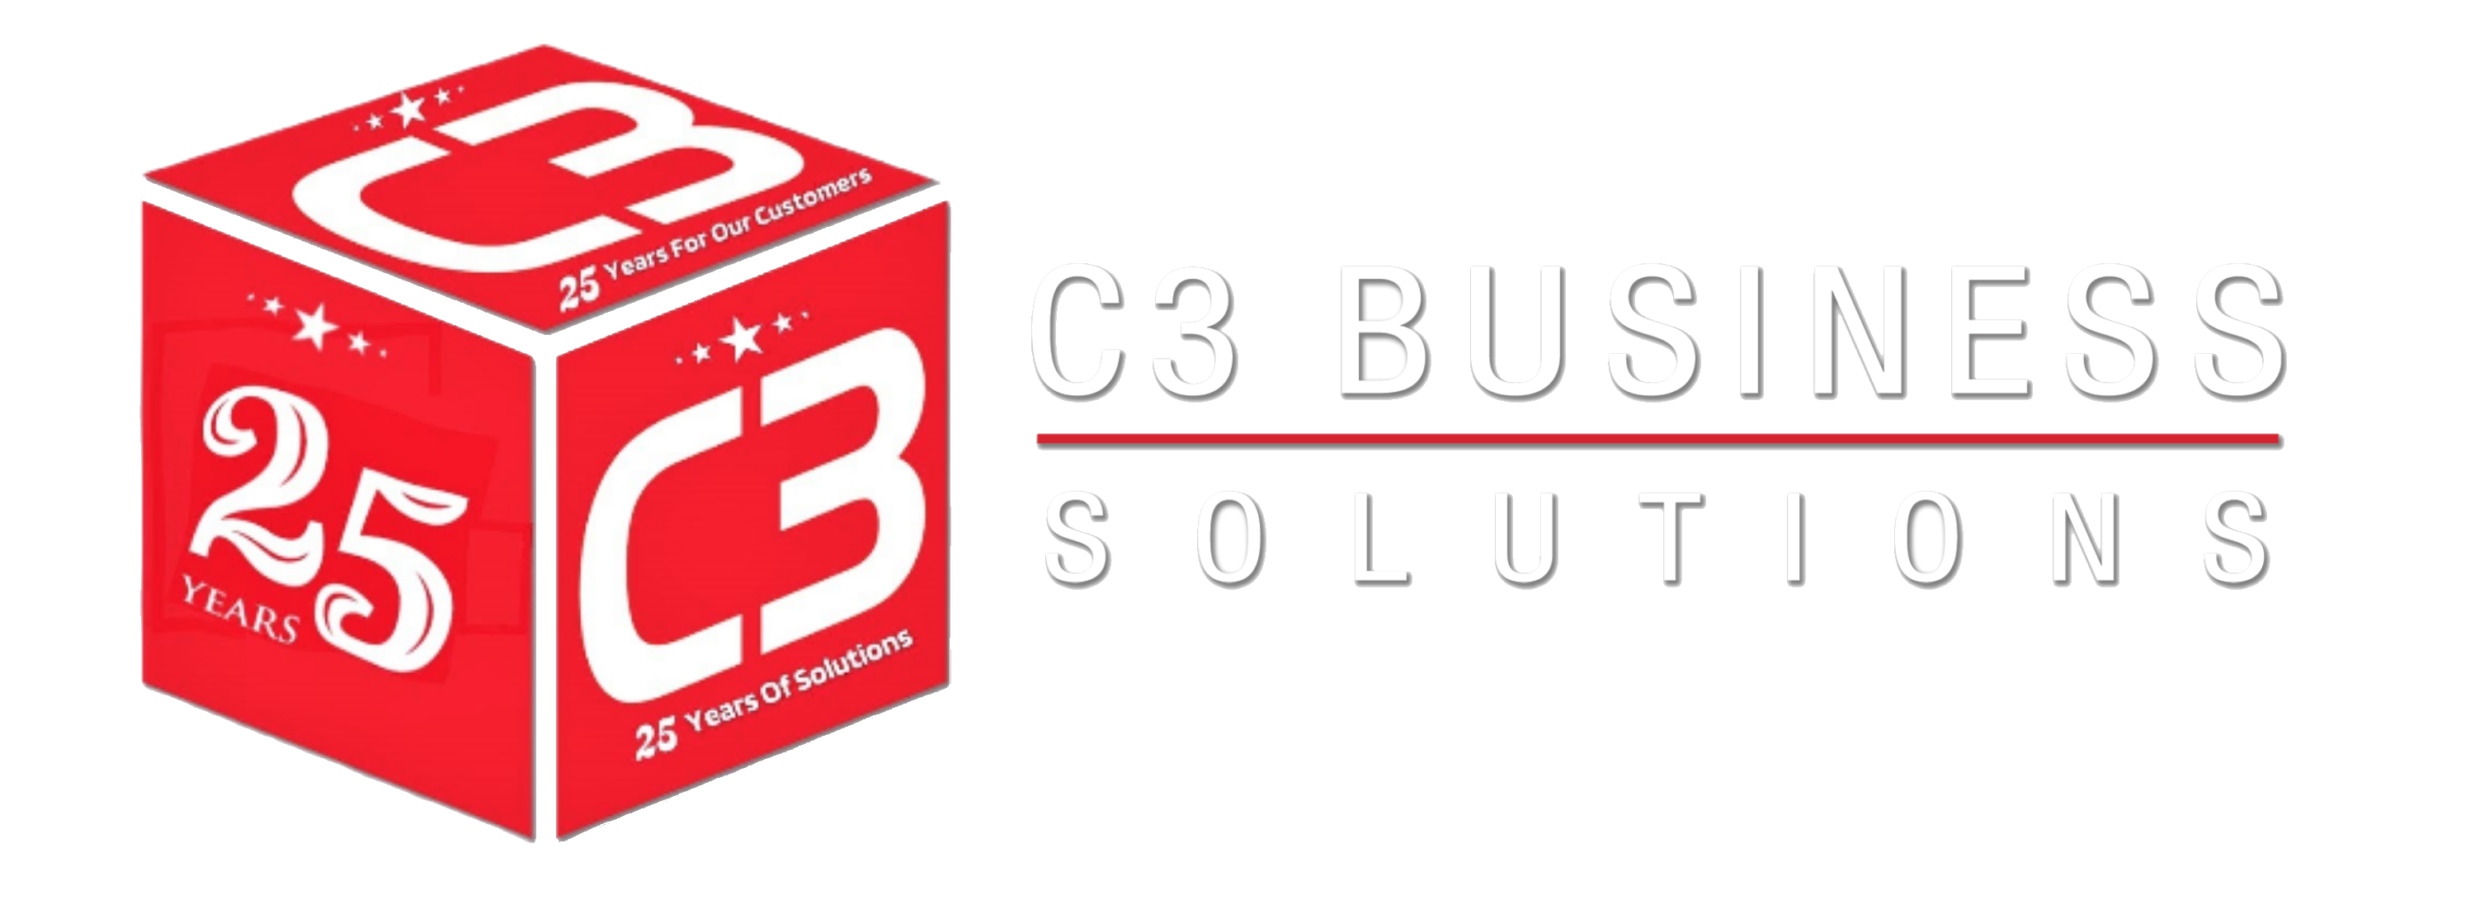 C3 Business Solutions